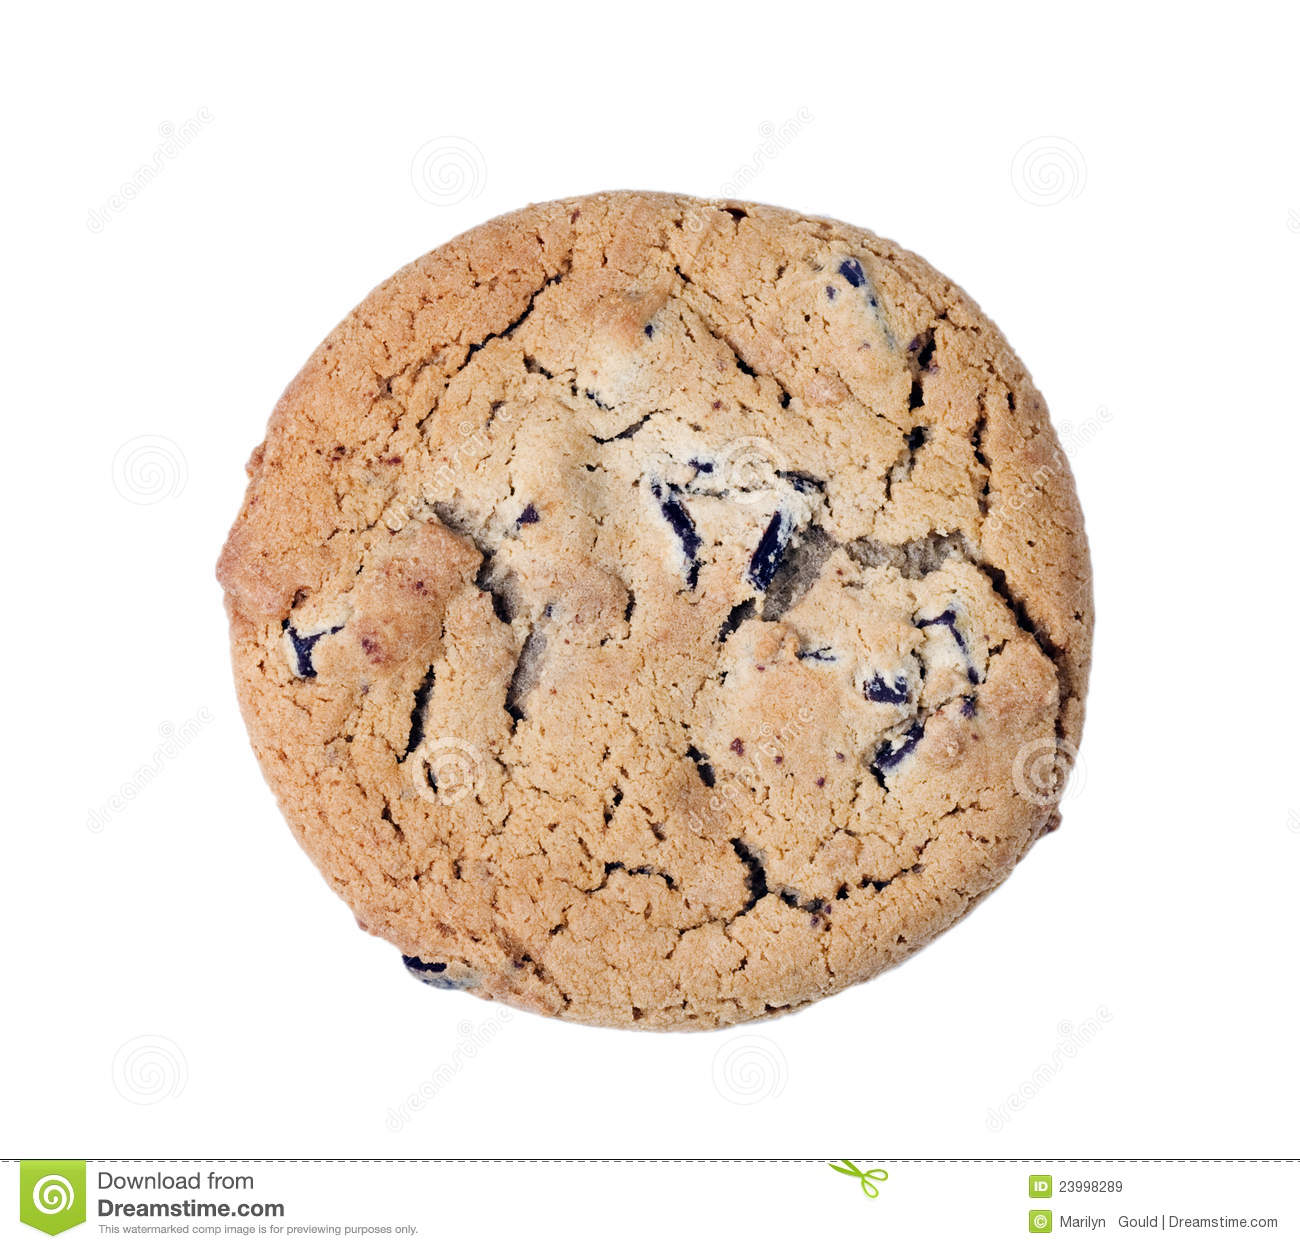 Chocolate Chip Cookie Royalty Free Stock Images   Image  23998289